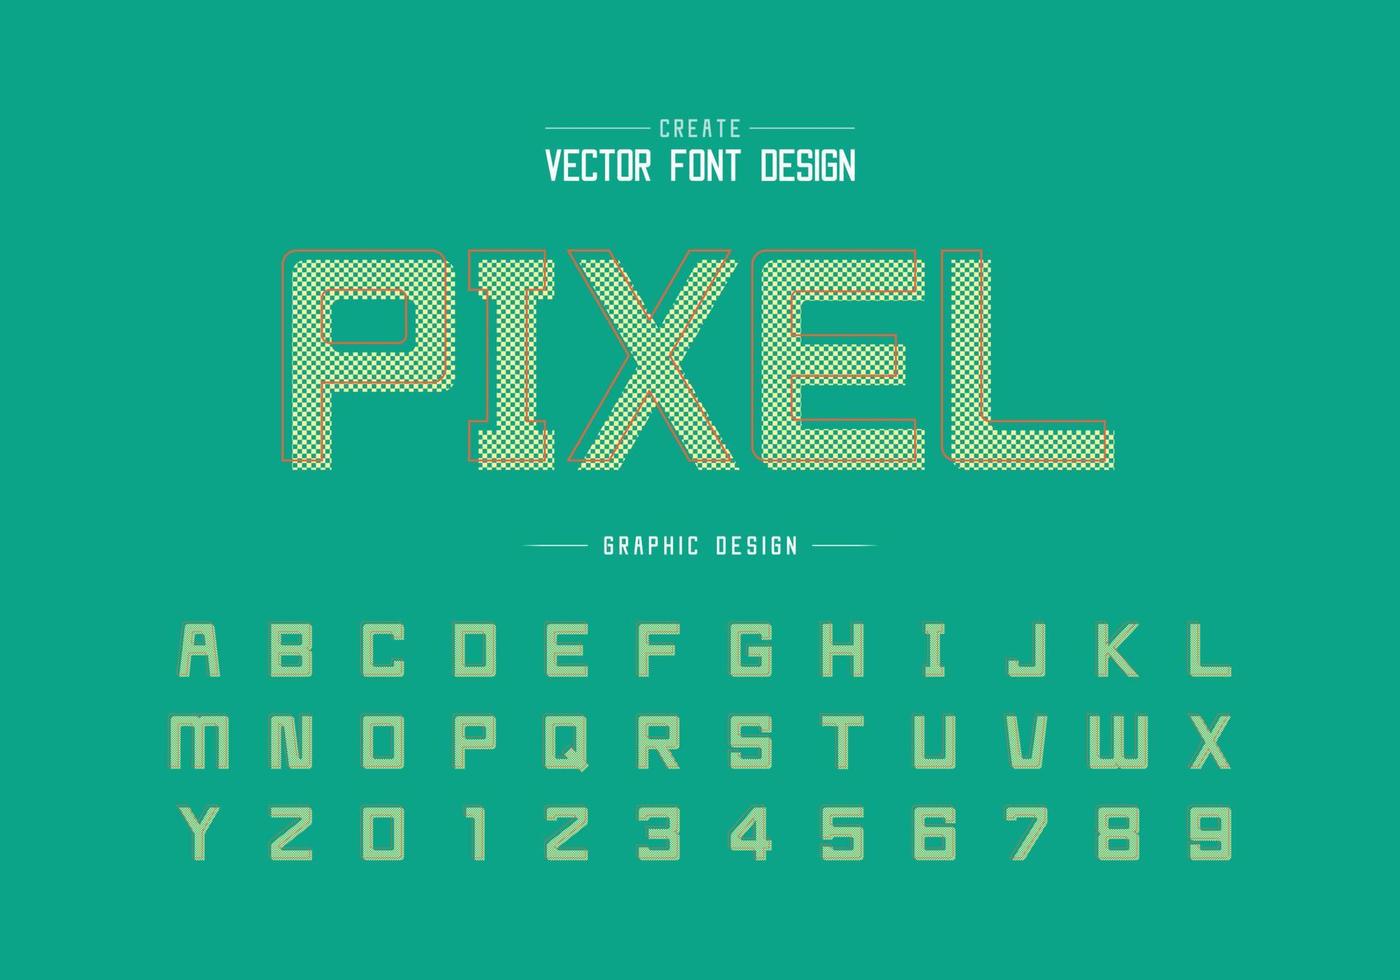 Pixel font and alphabet vector, Square typeface letter and number design, Graphic text on background vector